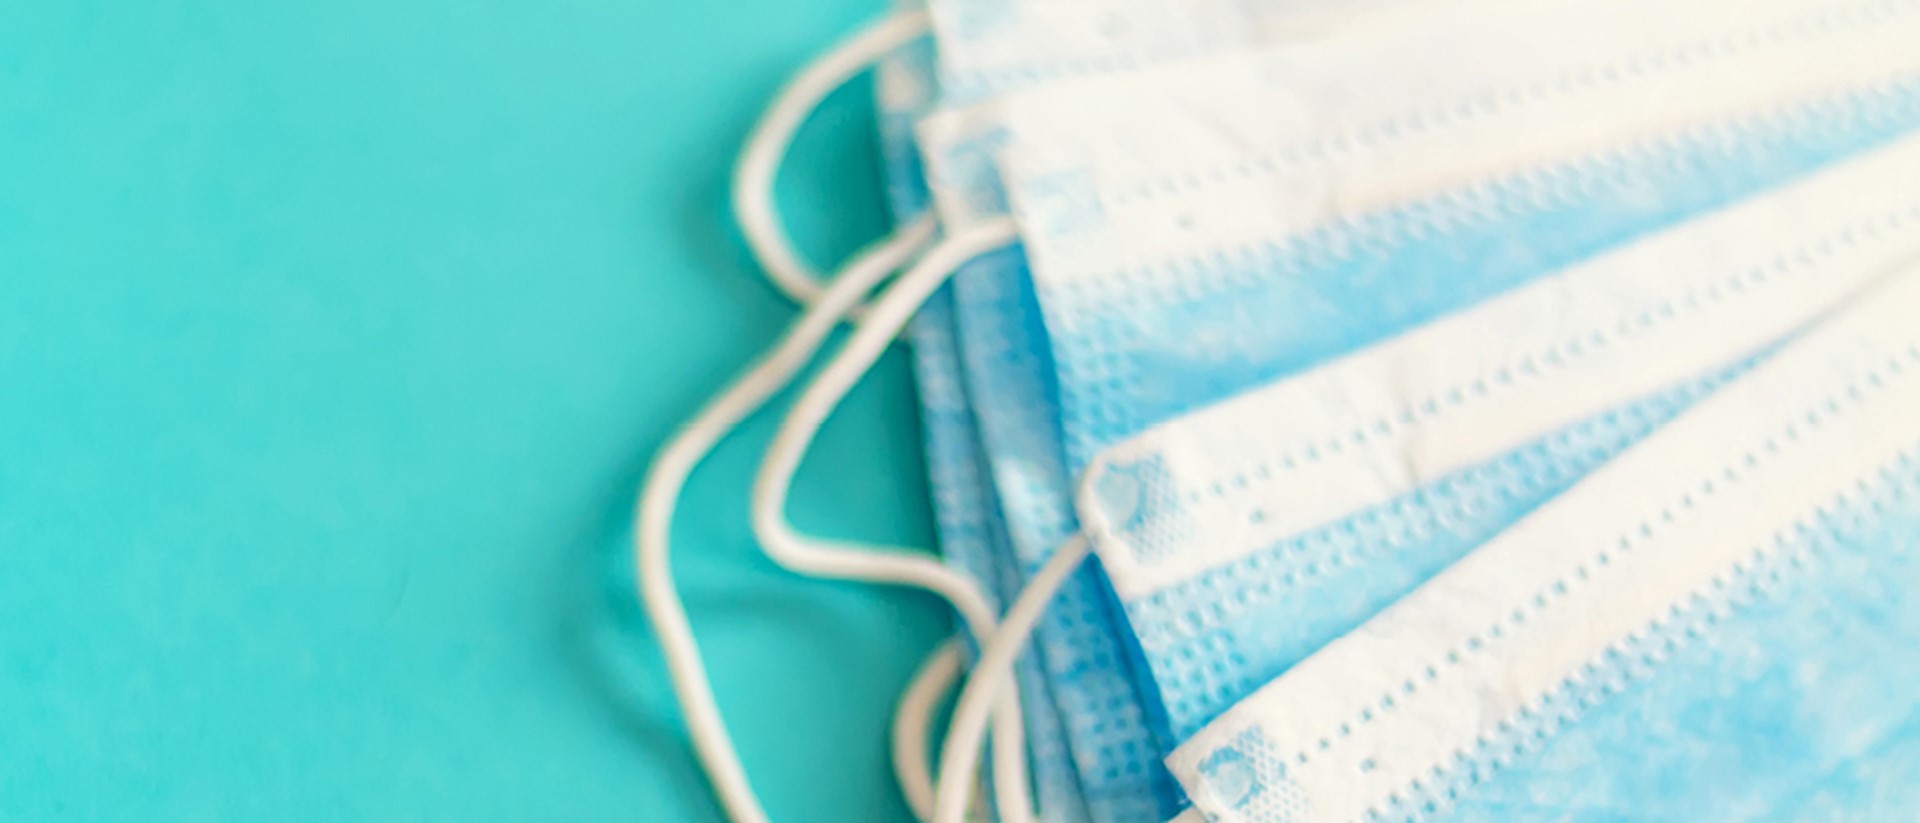 Image of a stack of blue surgical masks on a teal background